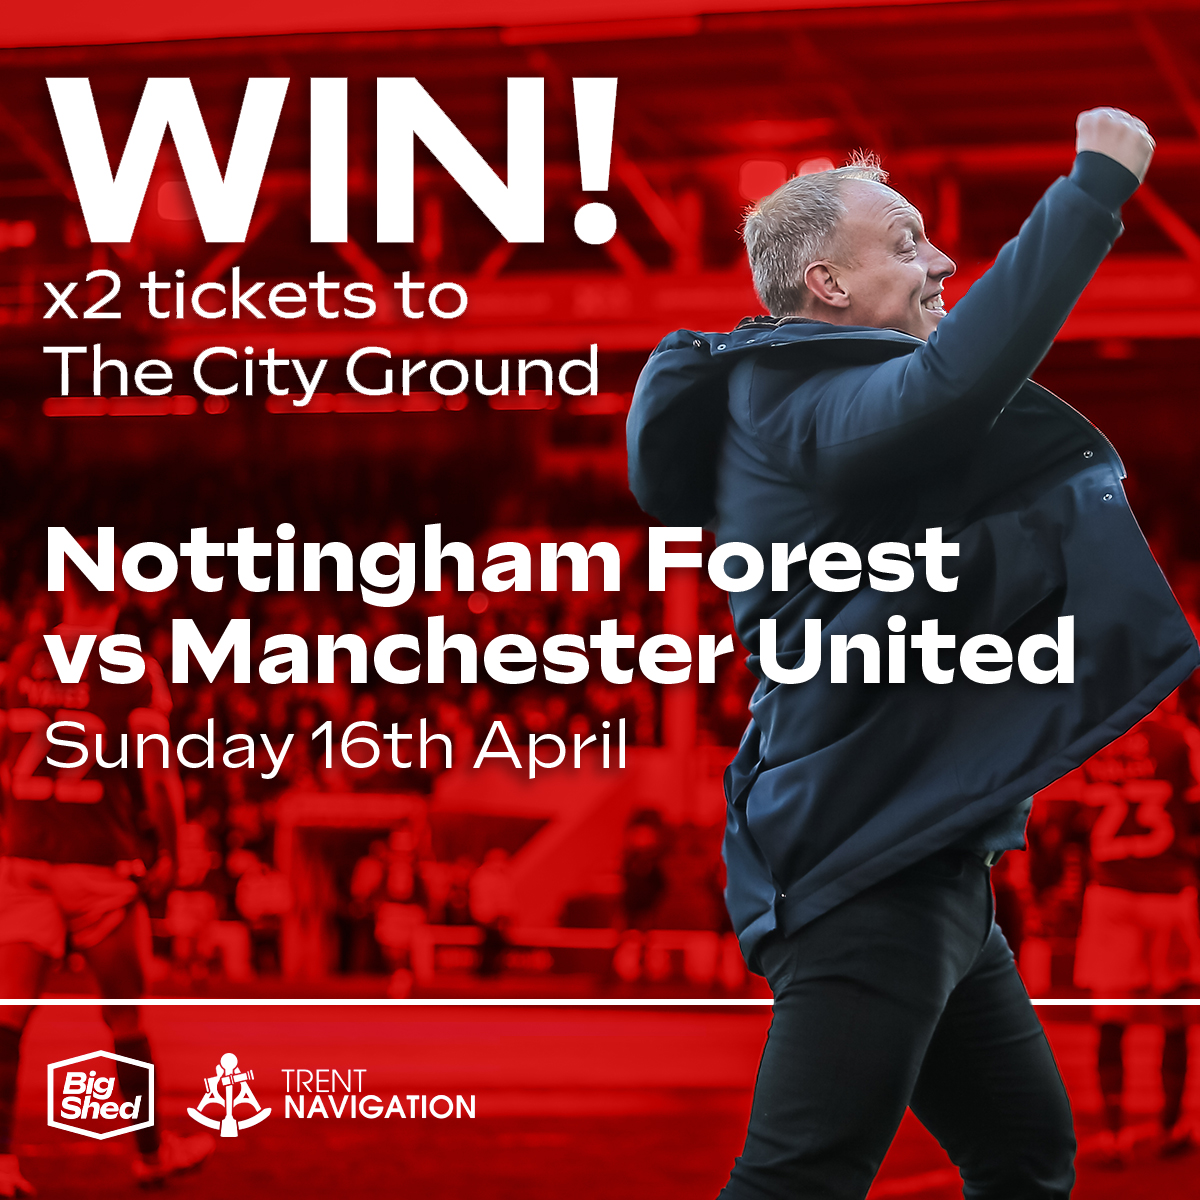 Win 2 tickets to Nottingham Forest vs Manchester United at The City Ground ⚽️ Simply RT and give us a follow to enter! We'll be announcing the winner on Friday 14th April - good luck! #NFFC #NottinghamForest